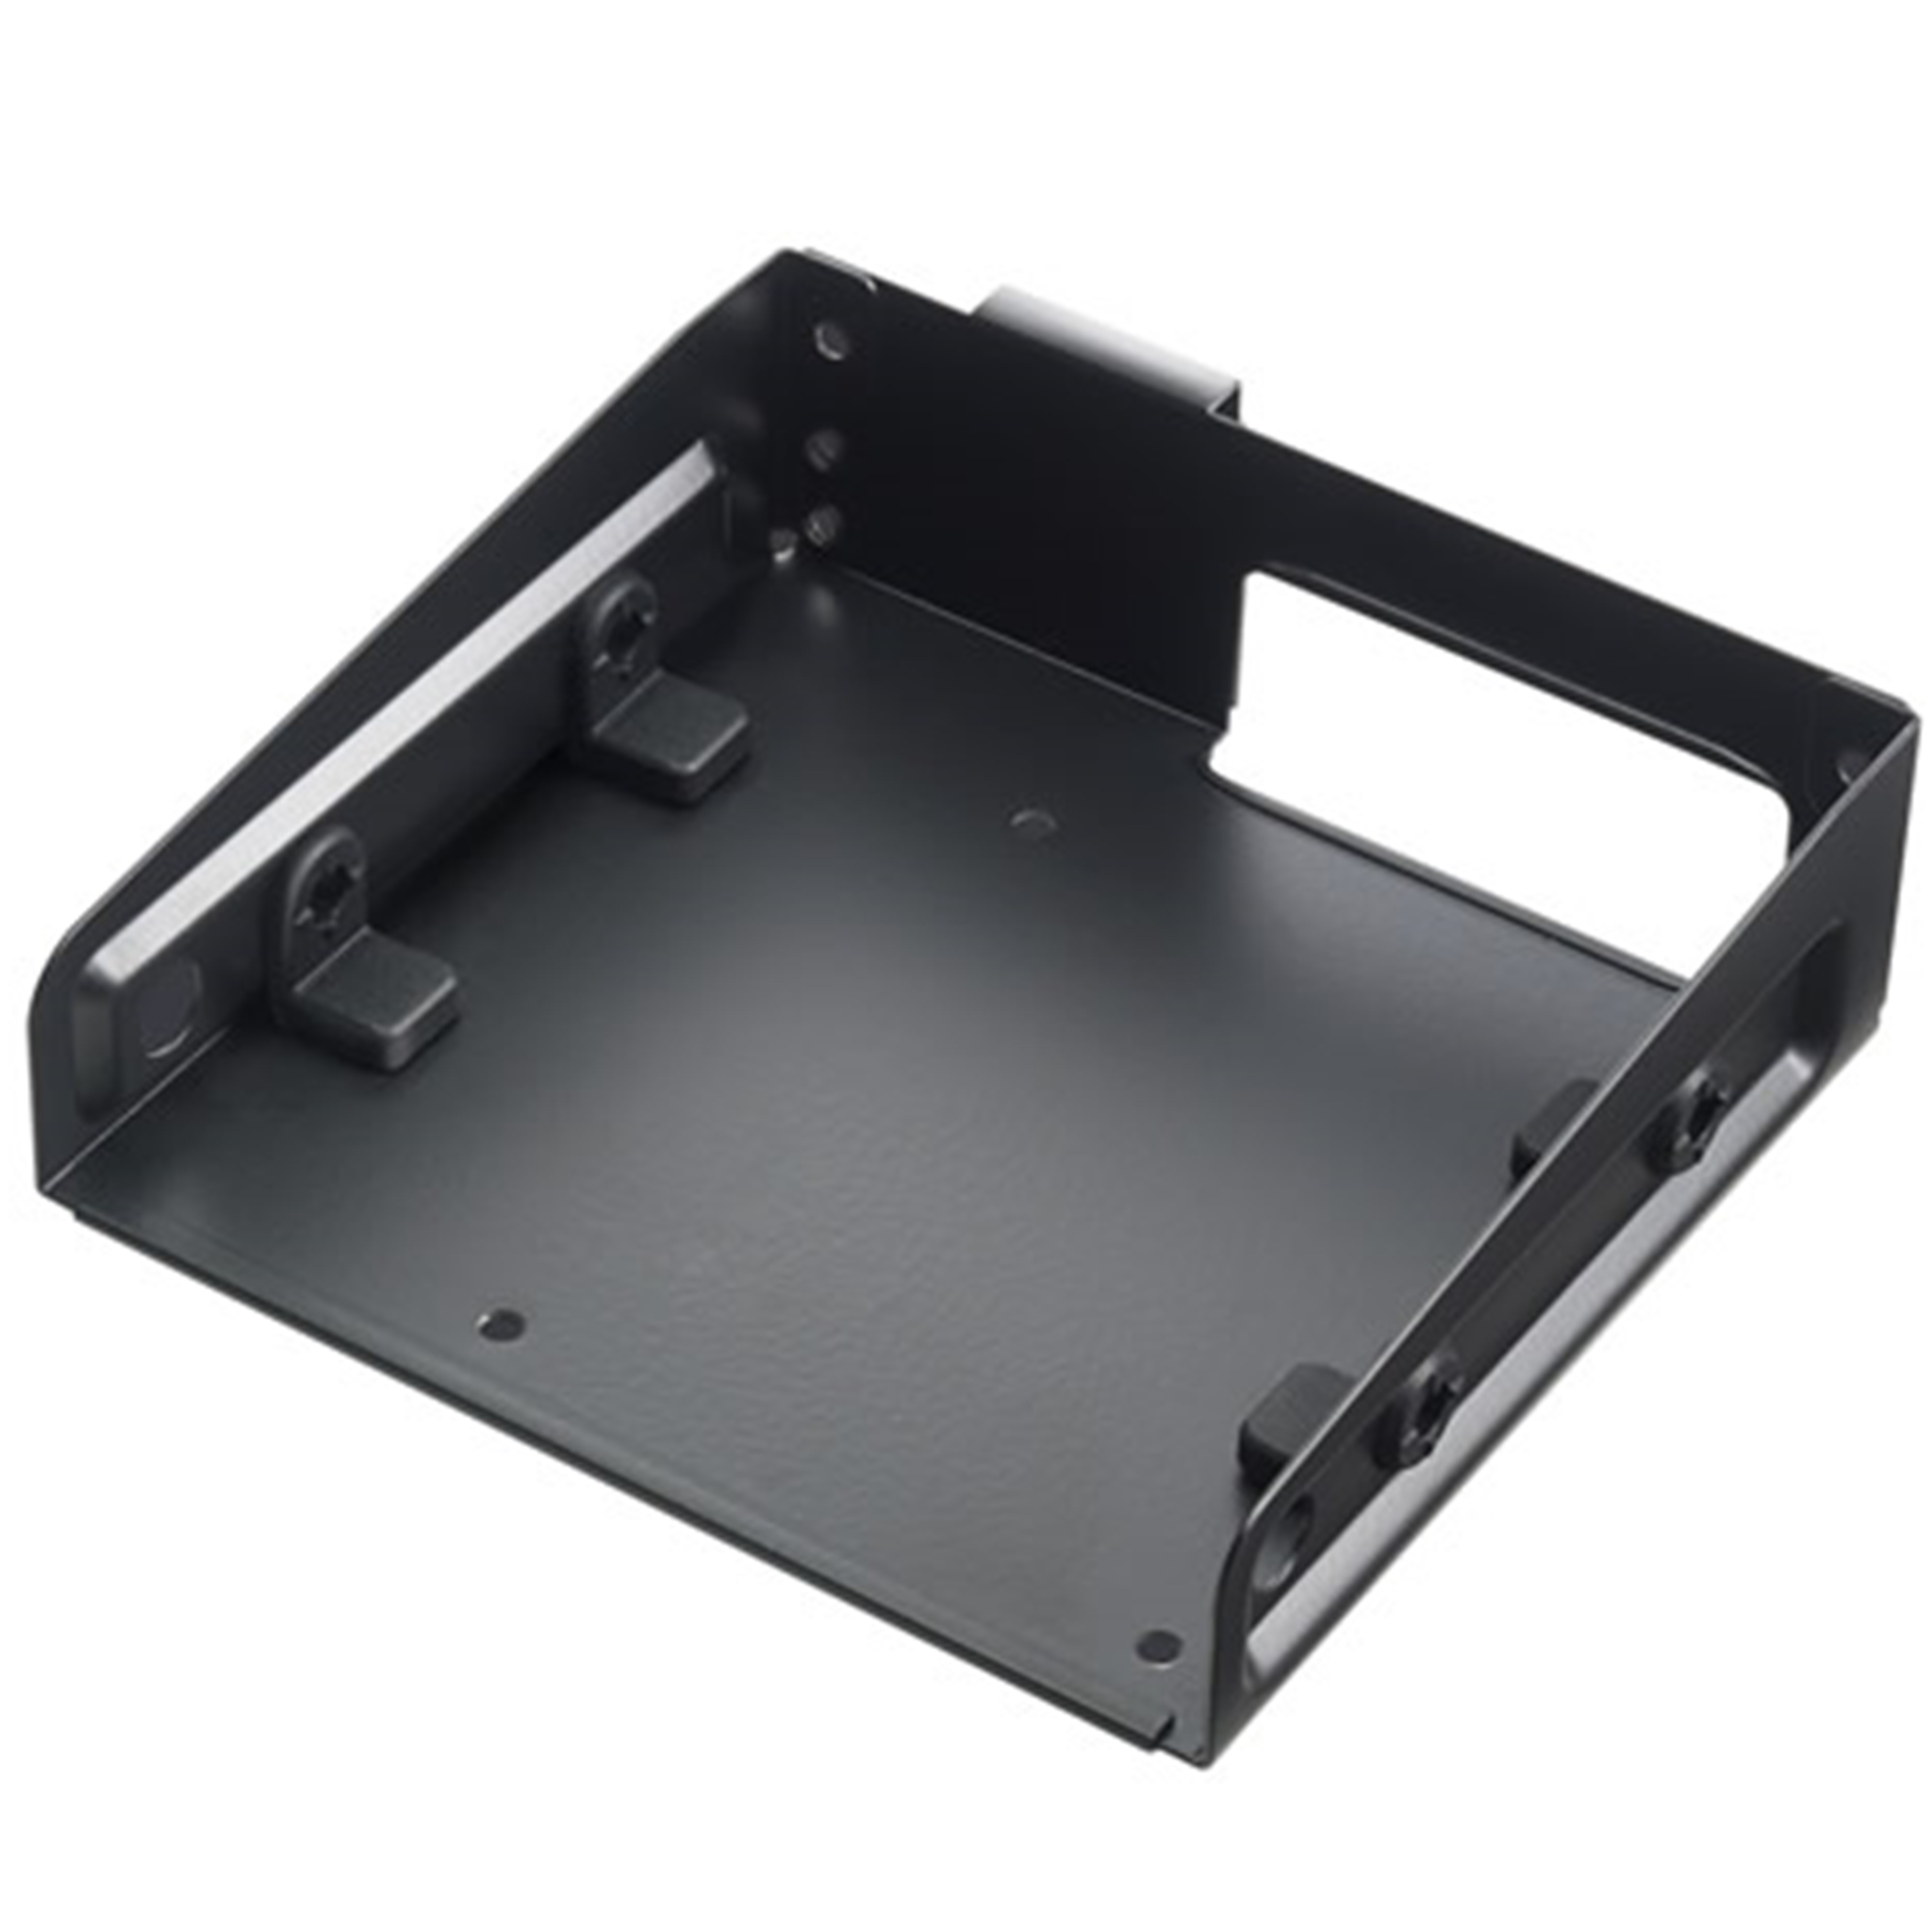 Single Bay 2.5”/3.5” HDD Cage for COSMOS C700 Series | Cooler Master